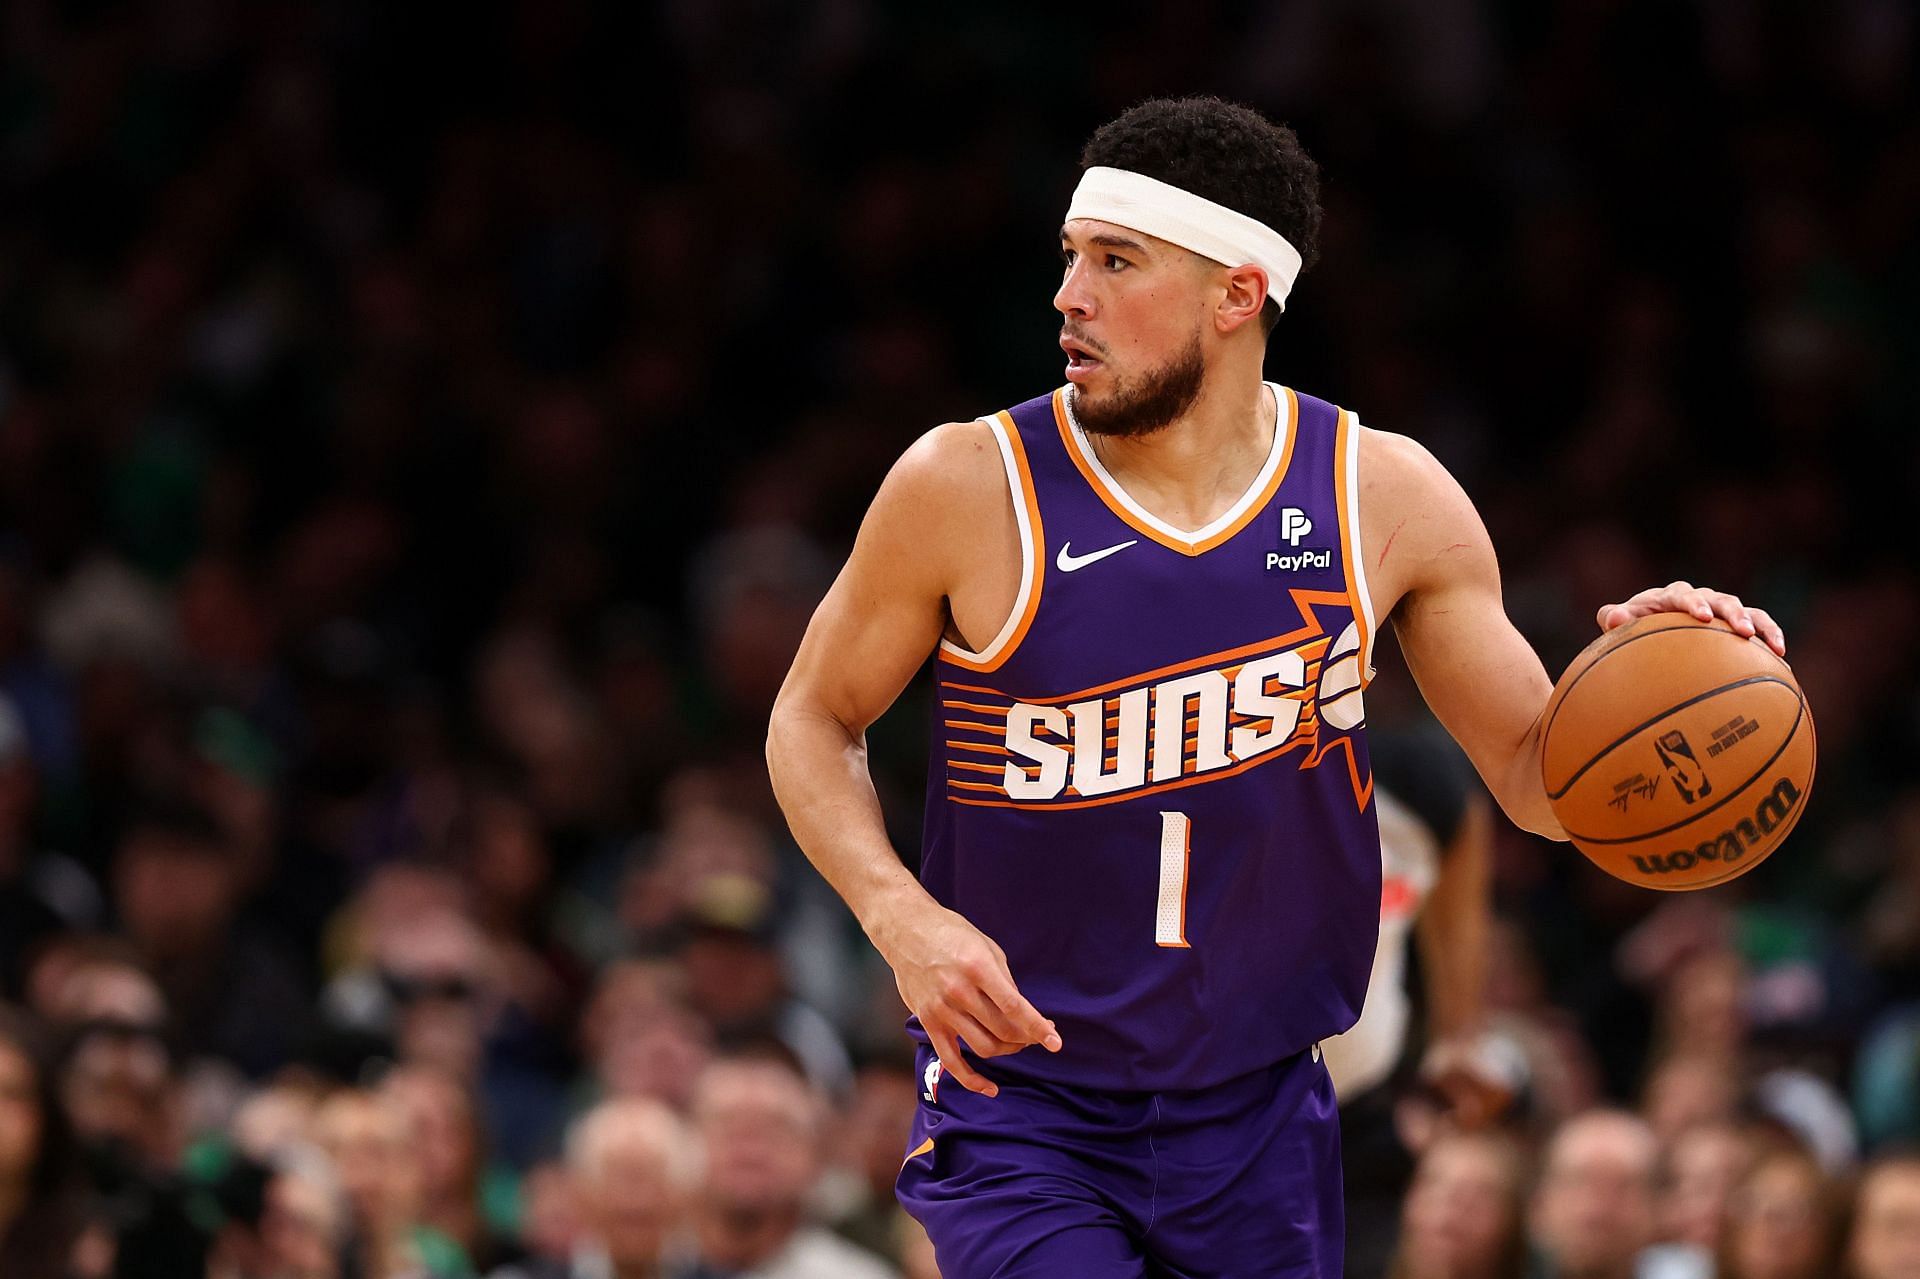 The Phoenix Suns improved to No. 7 in the Western Conference.